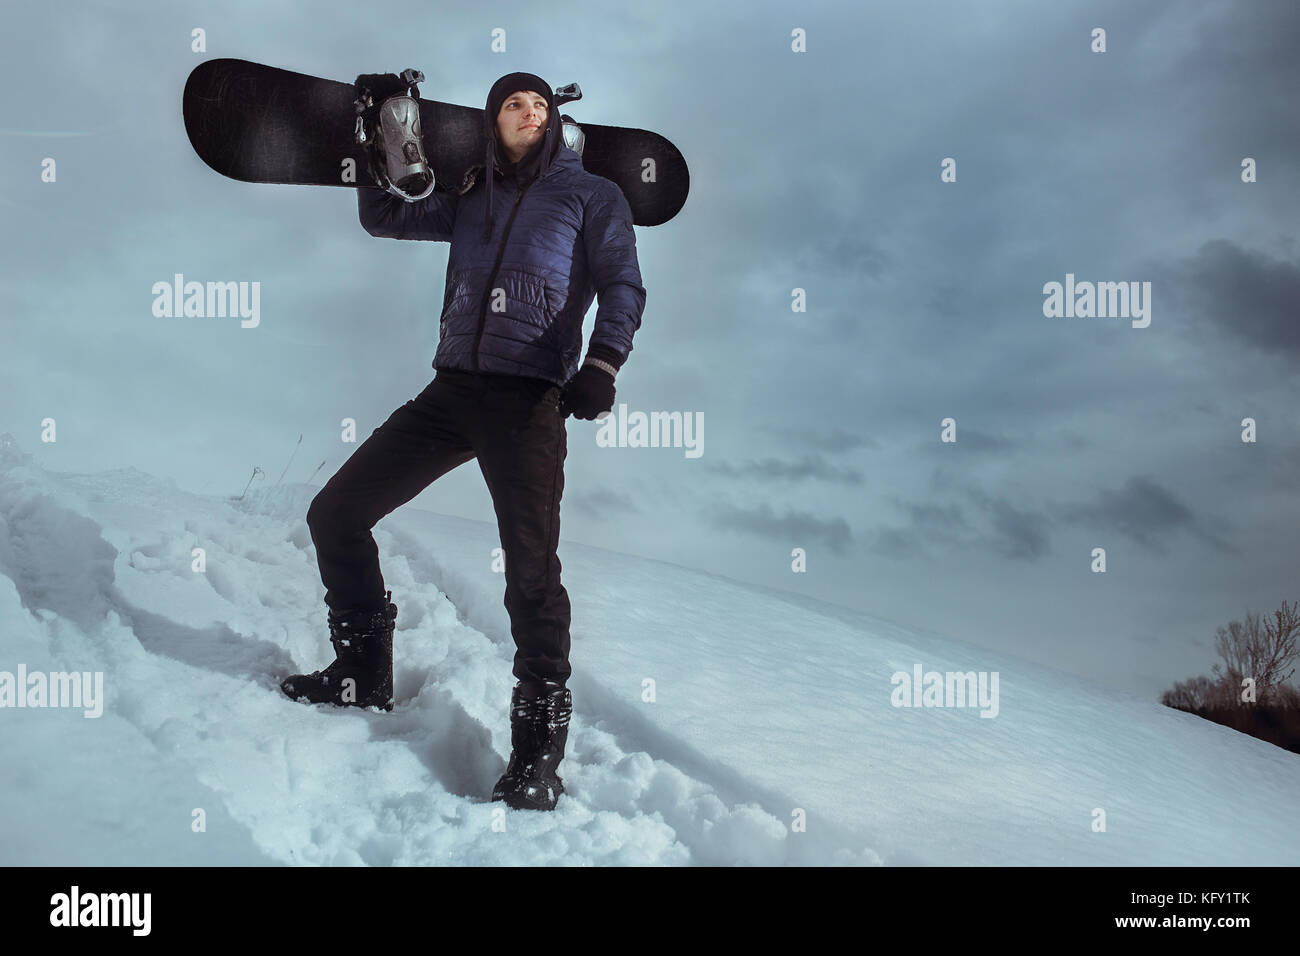 Young snowboarder standing on hill and holding board for snowboarding. Stock Photo